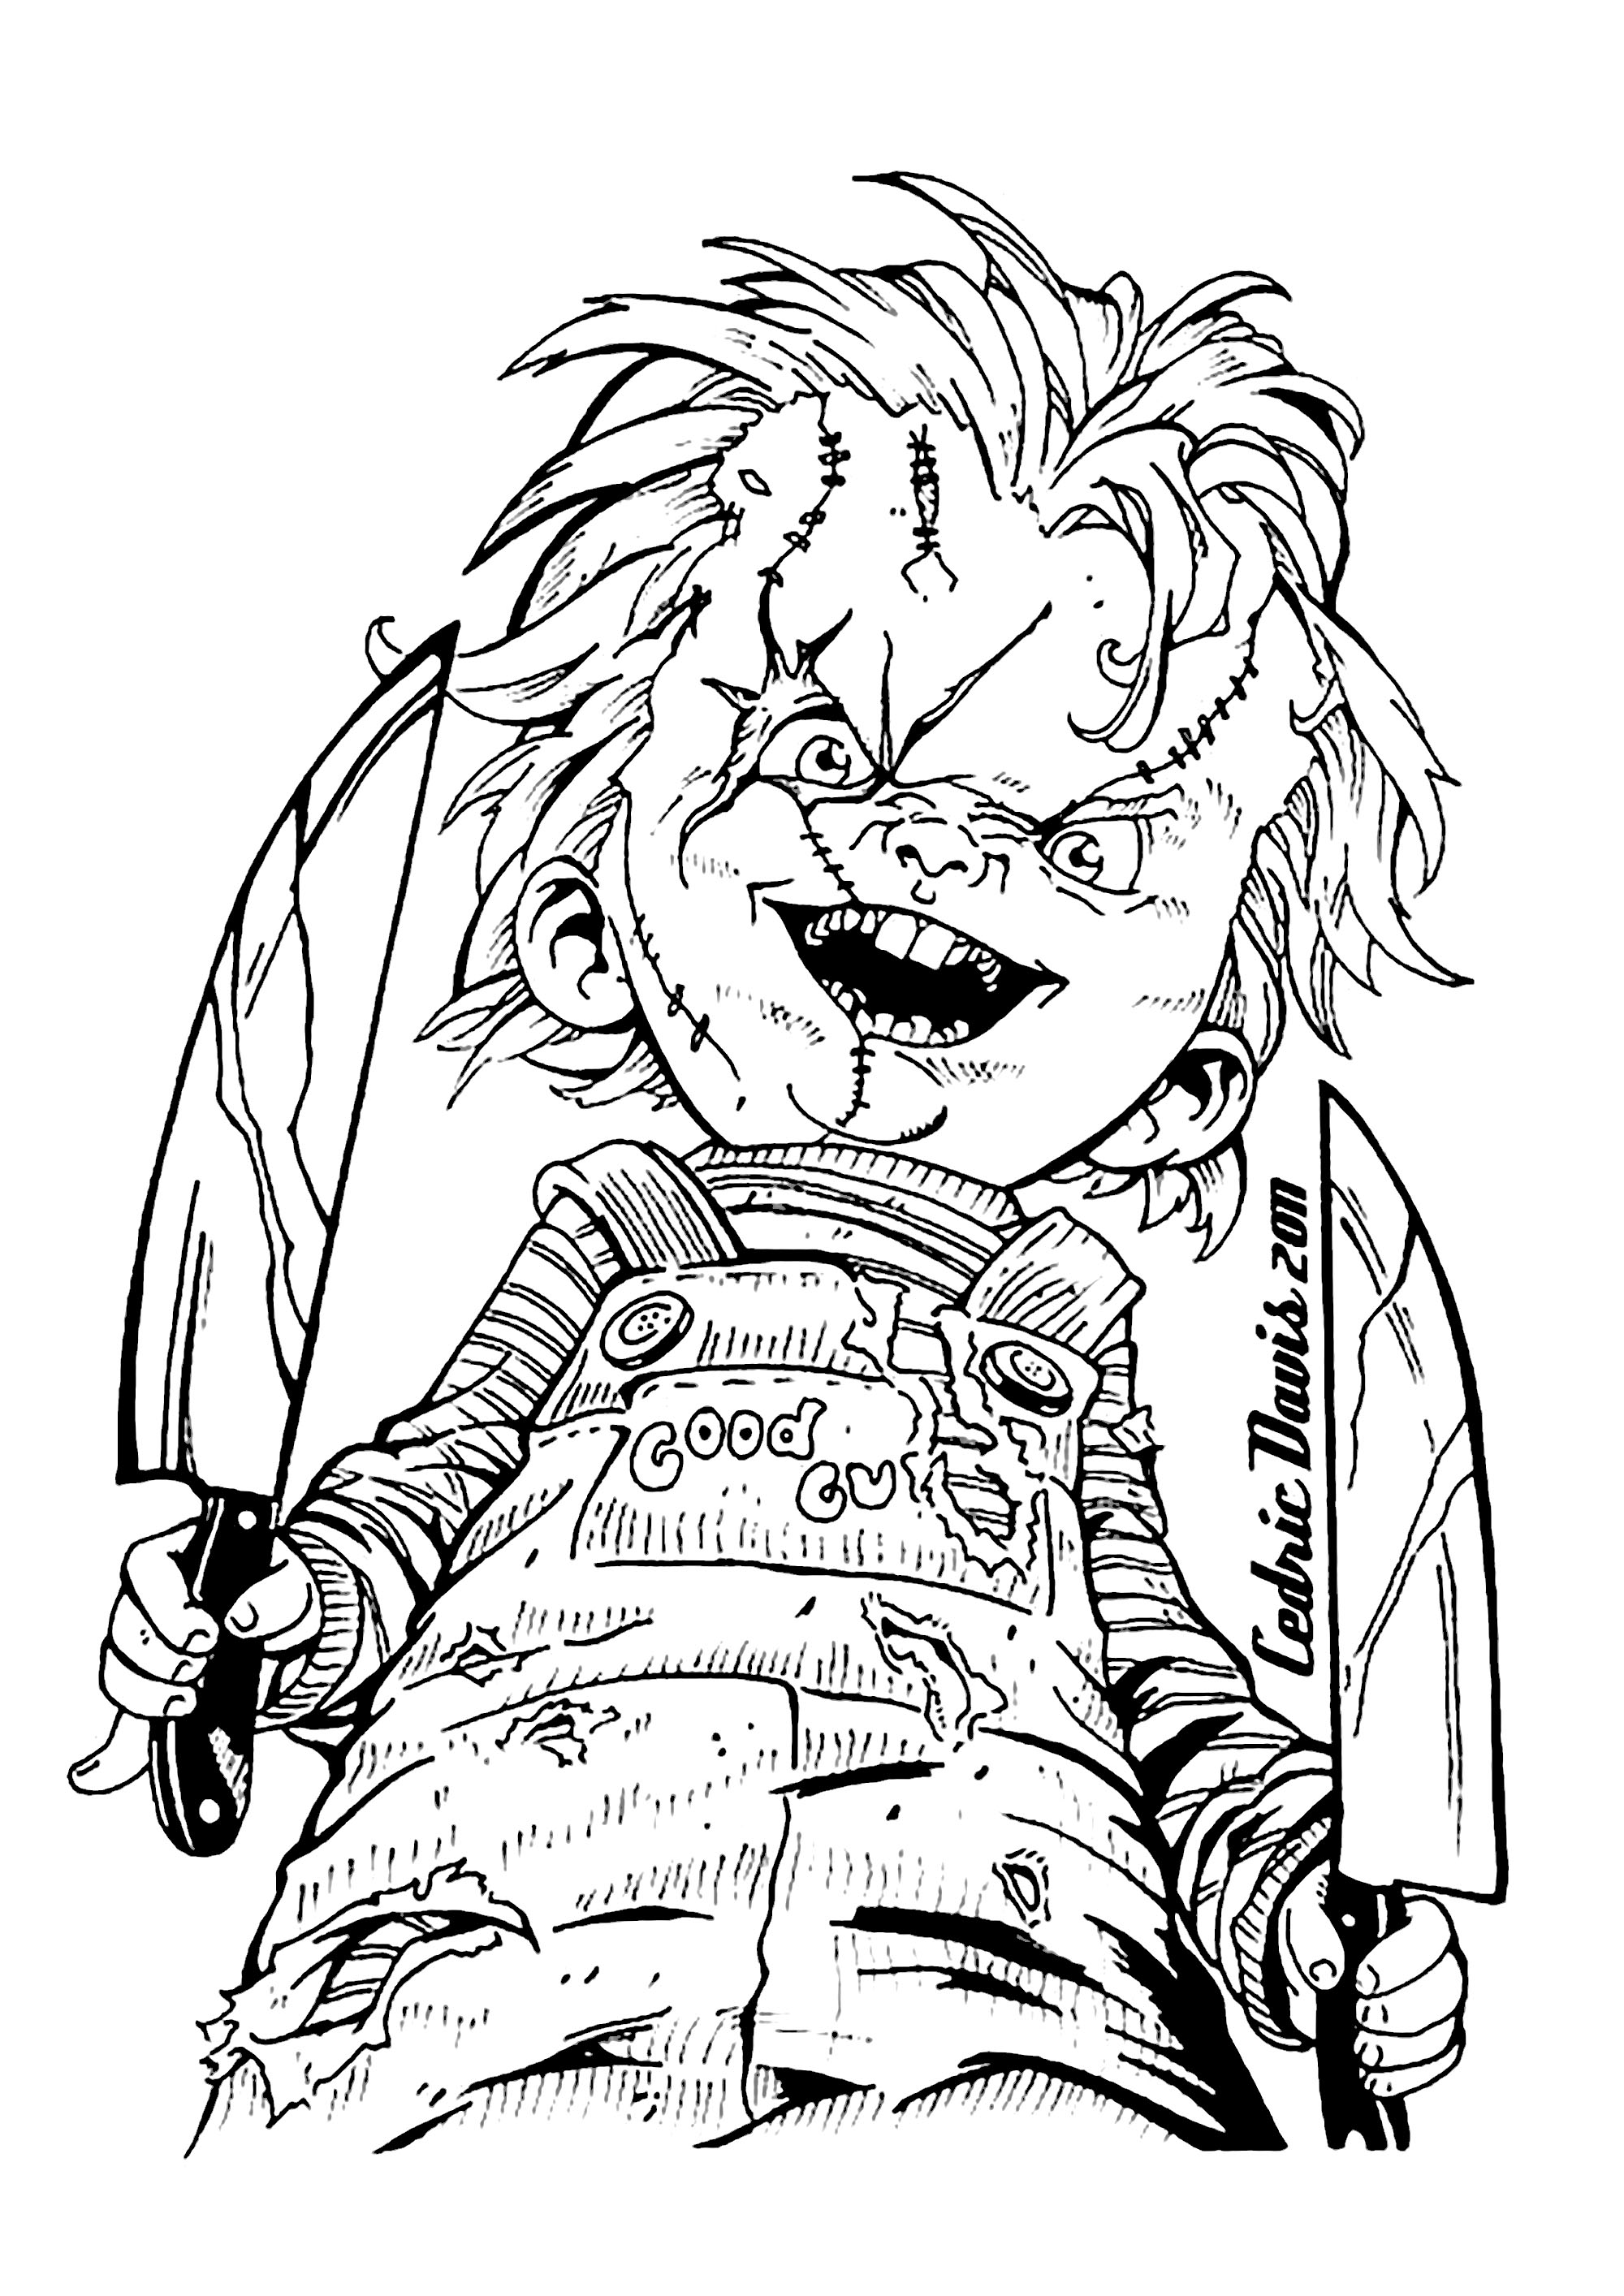 Download "Hi, I'm Chucky. Wanna play?" - Halloween Adult Coloring Pages